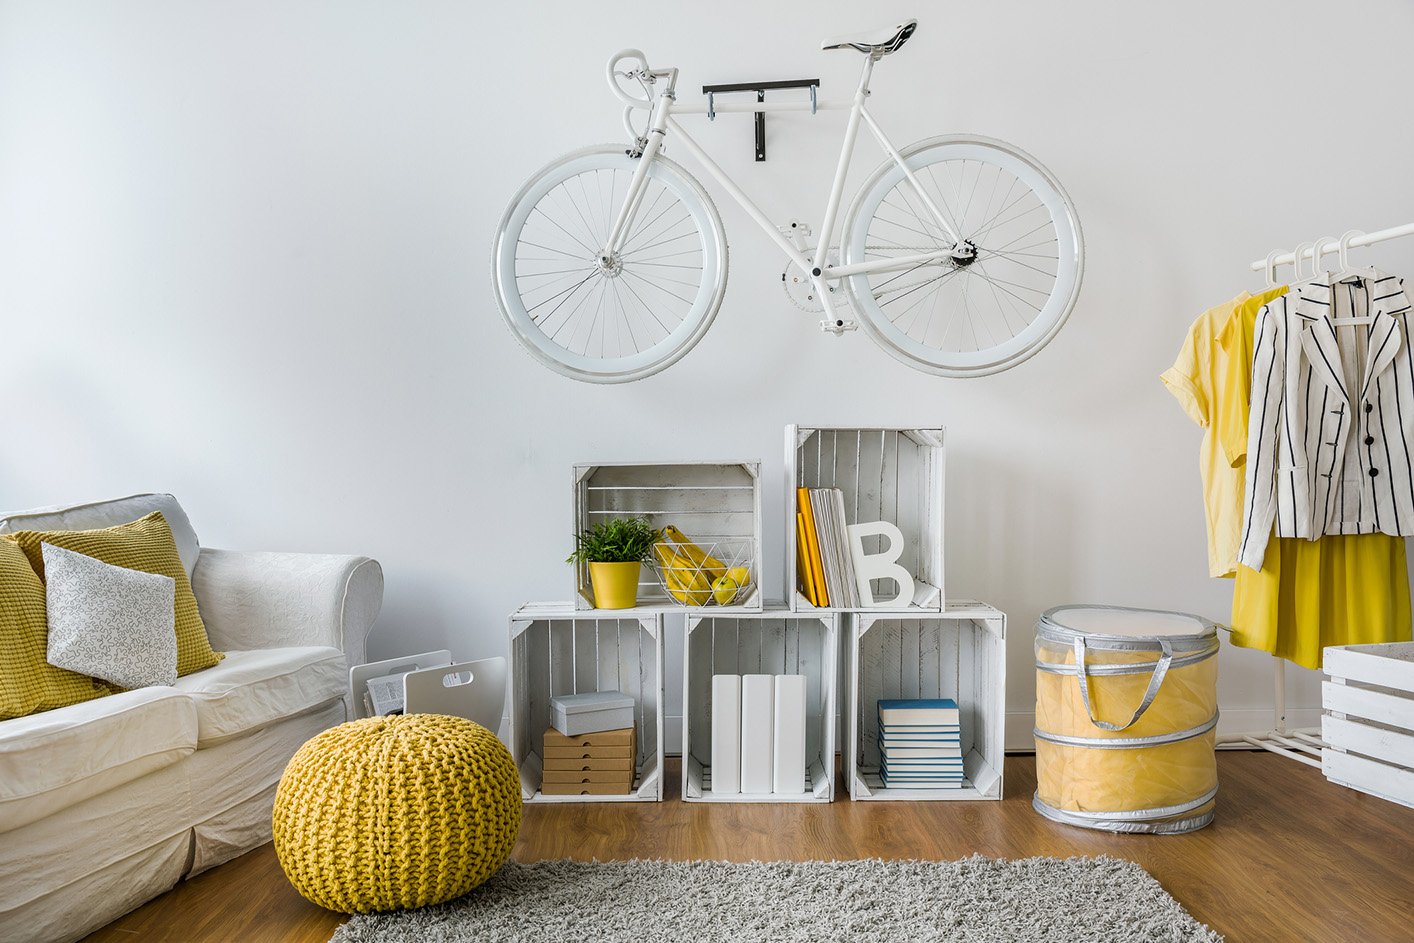 Tips to store your bike in a townhome or condo